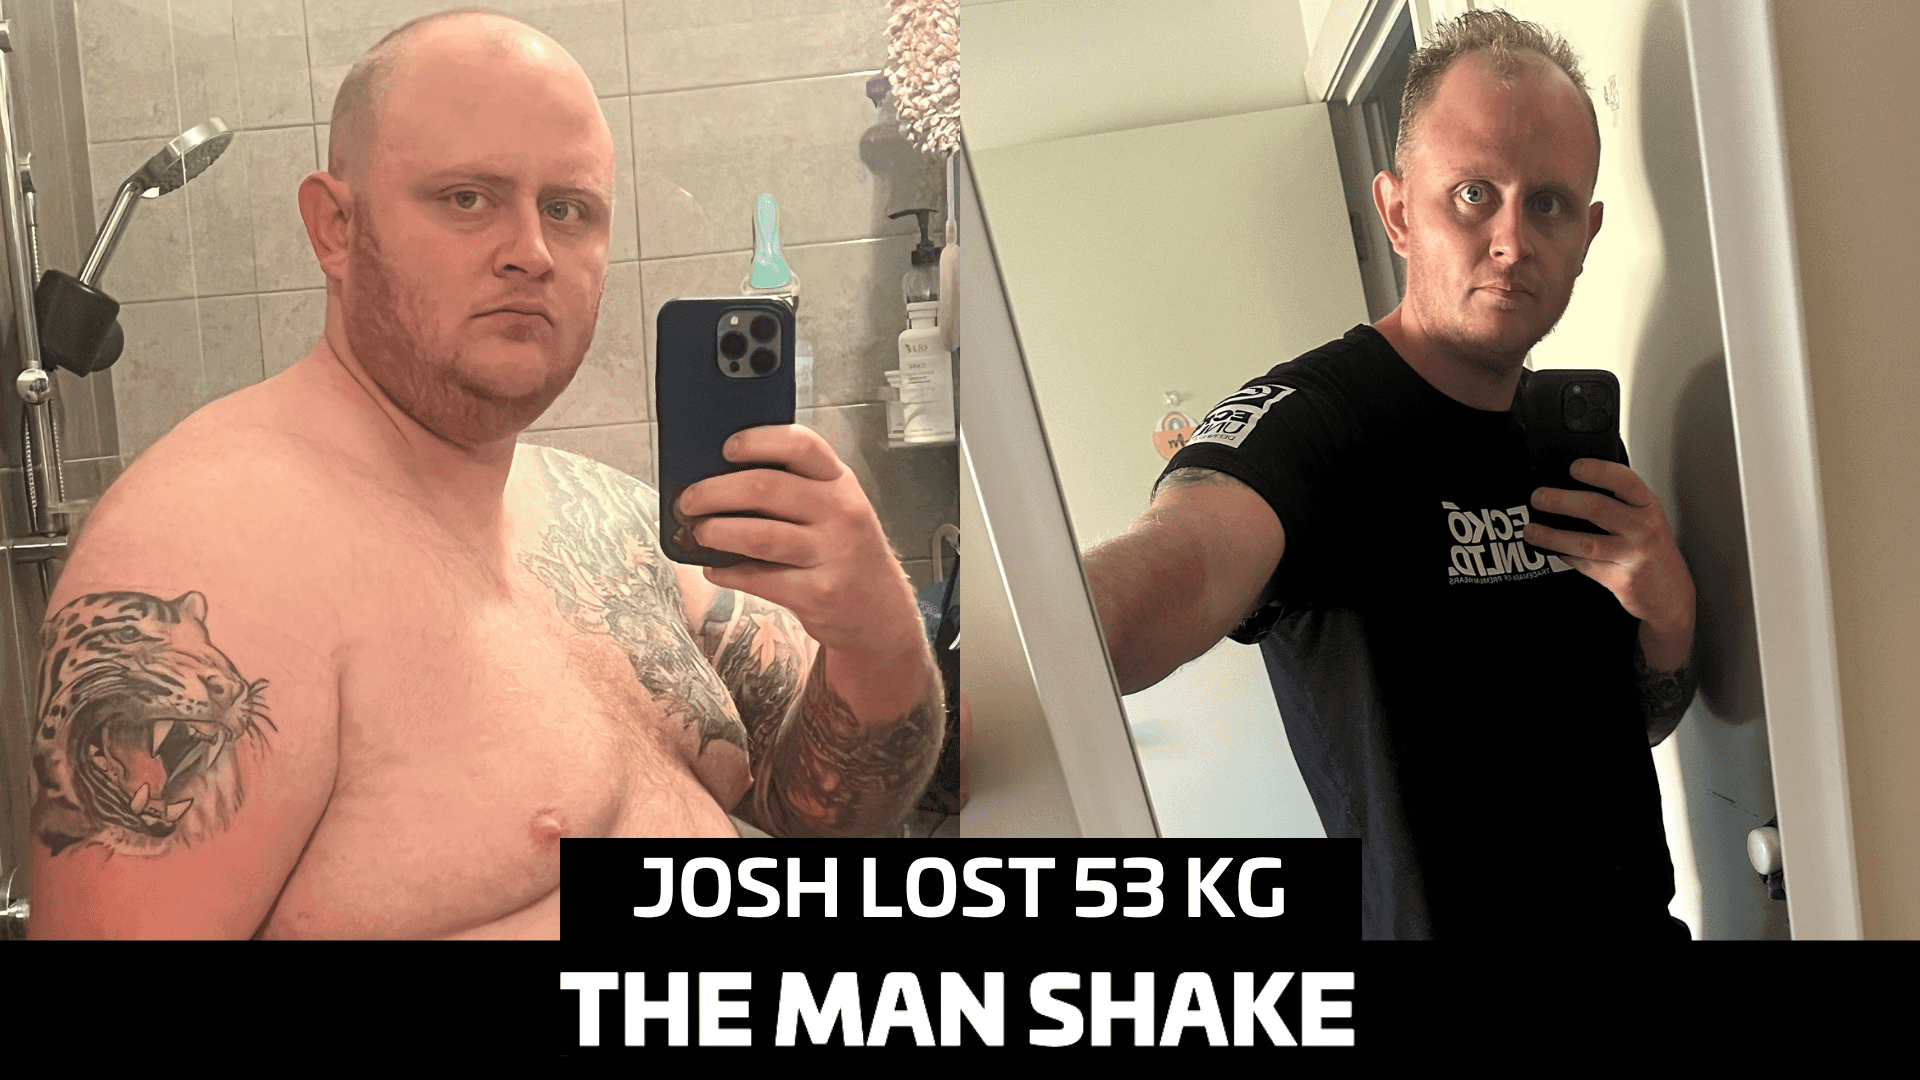 Josh wanted to run around with his kids, so he lost 53kgs!